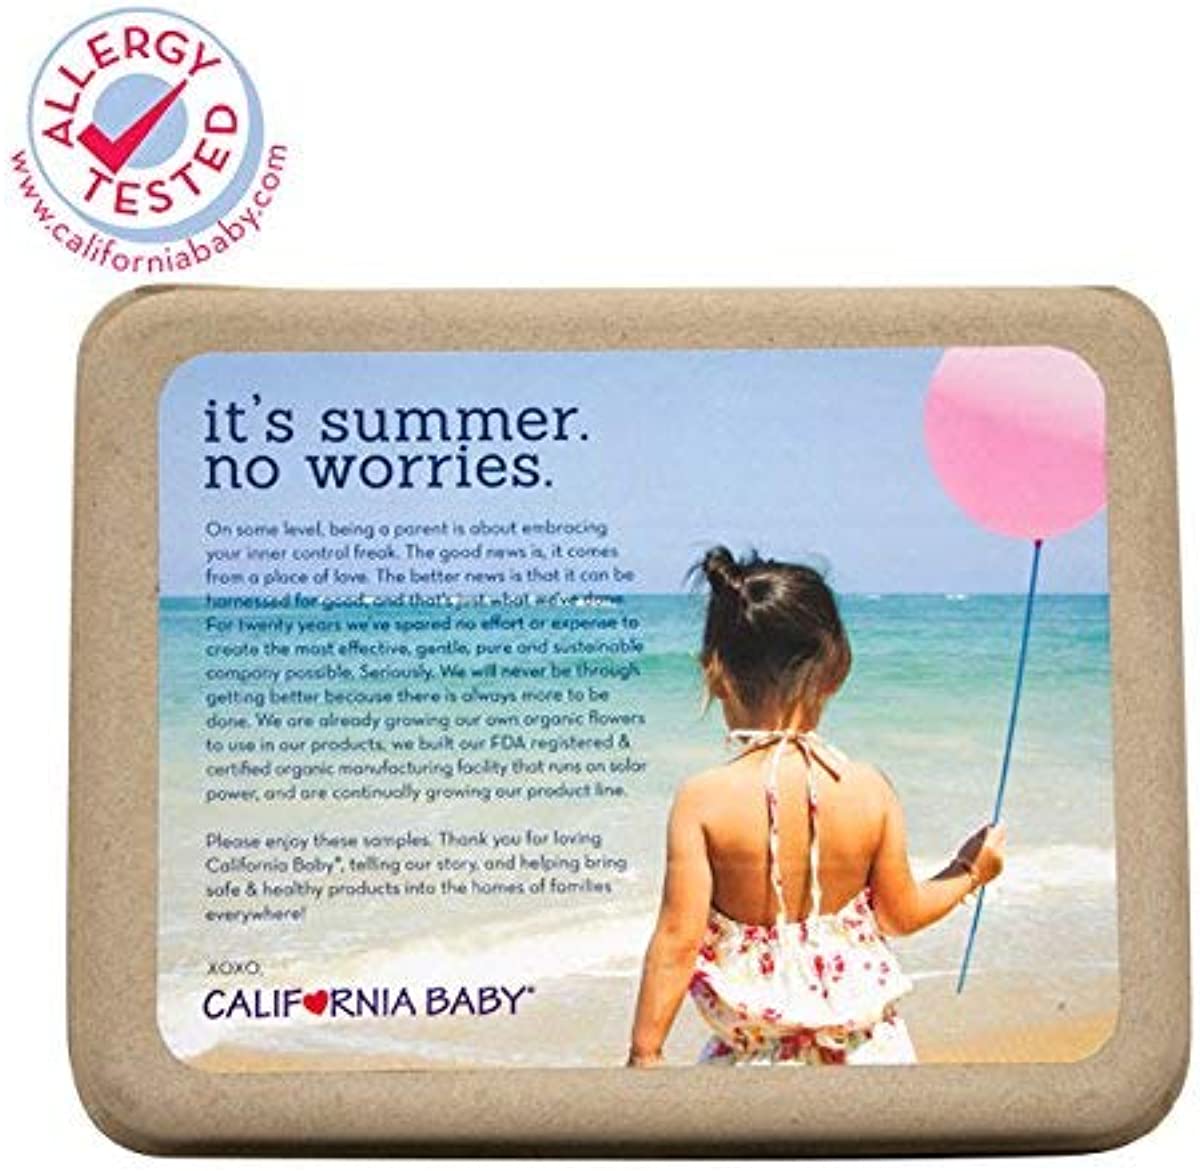 California Baby Summertime Essentials Kit - This Kit is a Great Way to Try Some of Our Sun-care Products & A Variety of Skin Soothing After-Sun Products Makes This Collection Complete